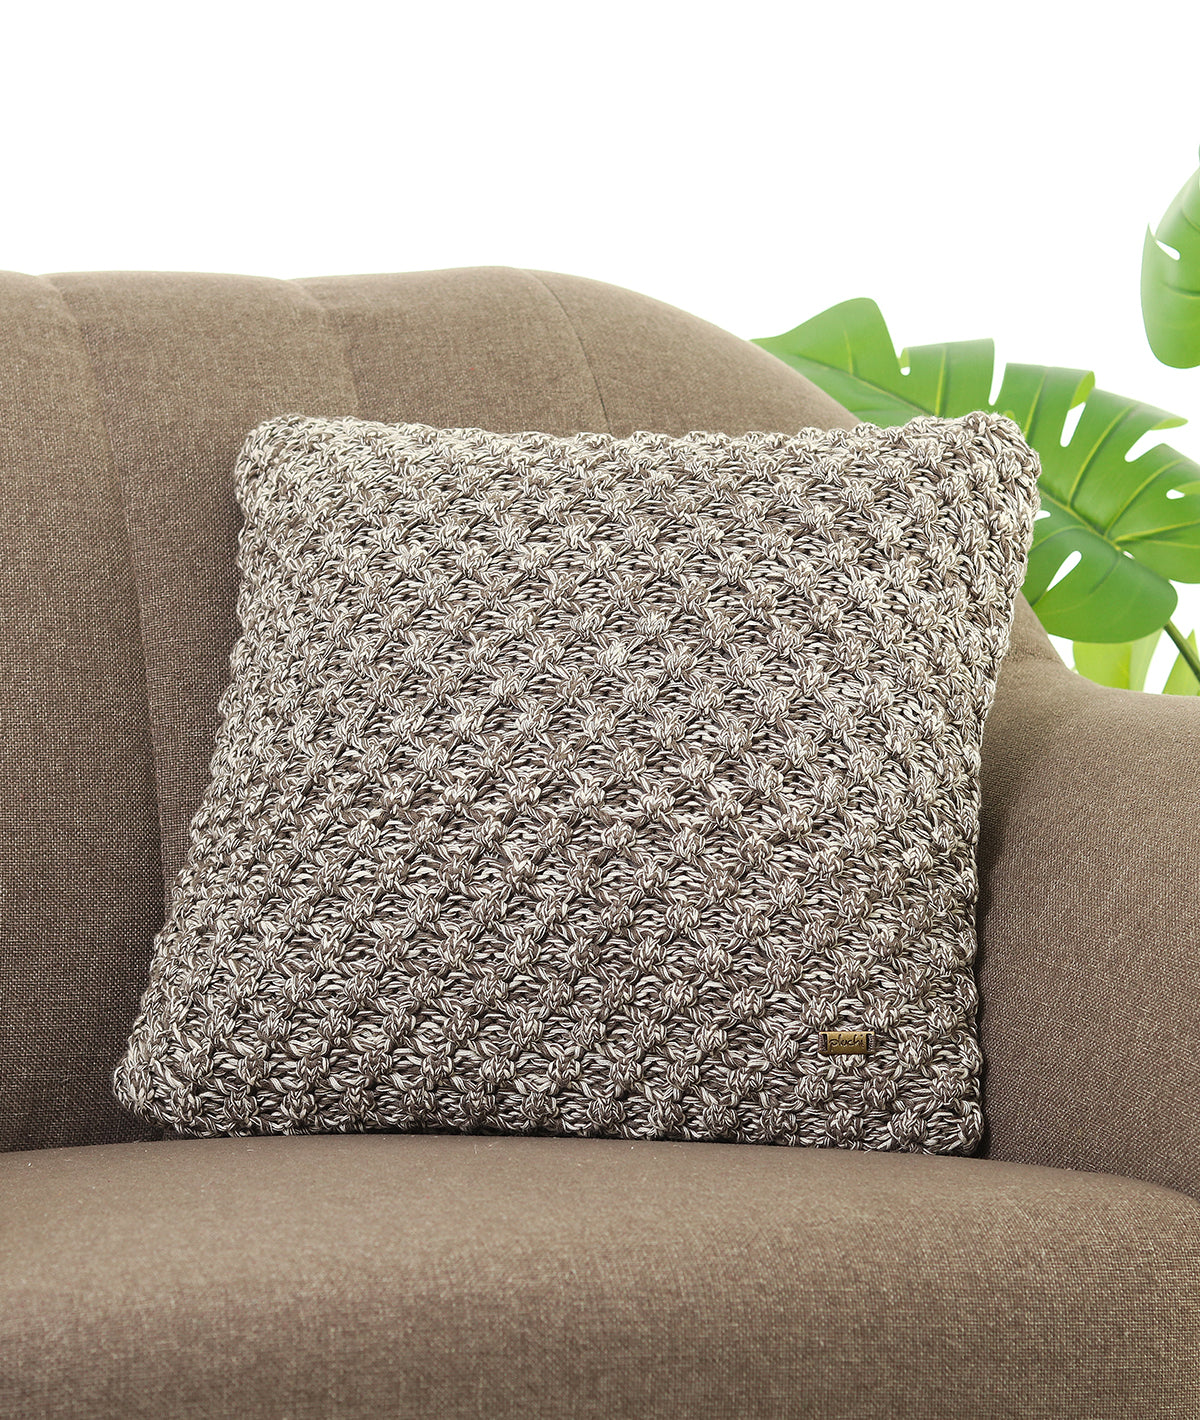 Popcorn Dark Pewter & Natural Cotton Knitted Decorative 16 X 16 Inches Cushion Cover